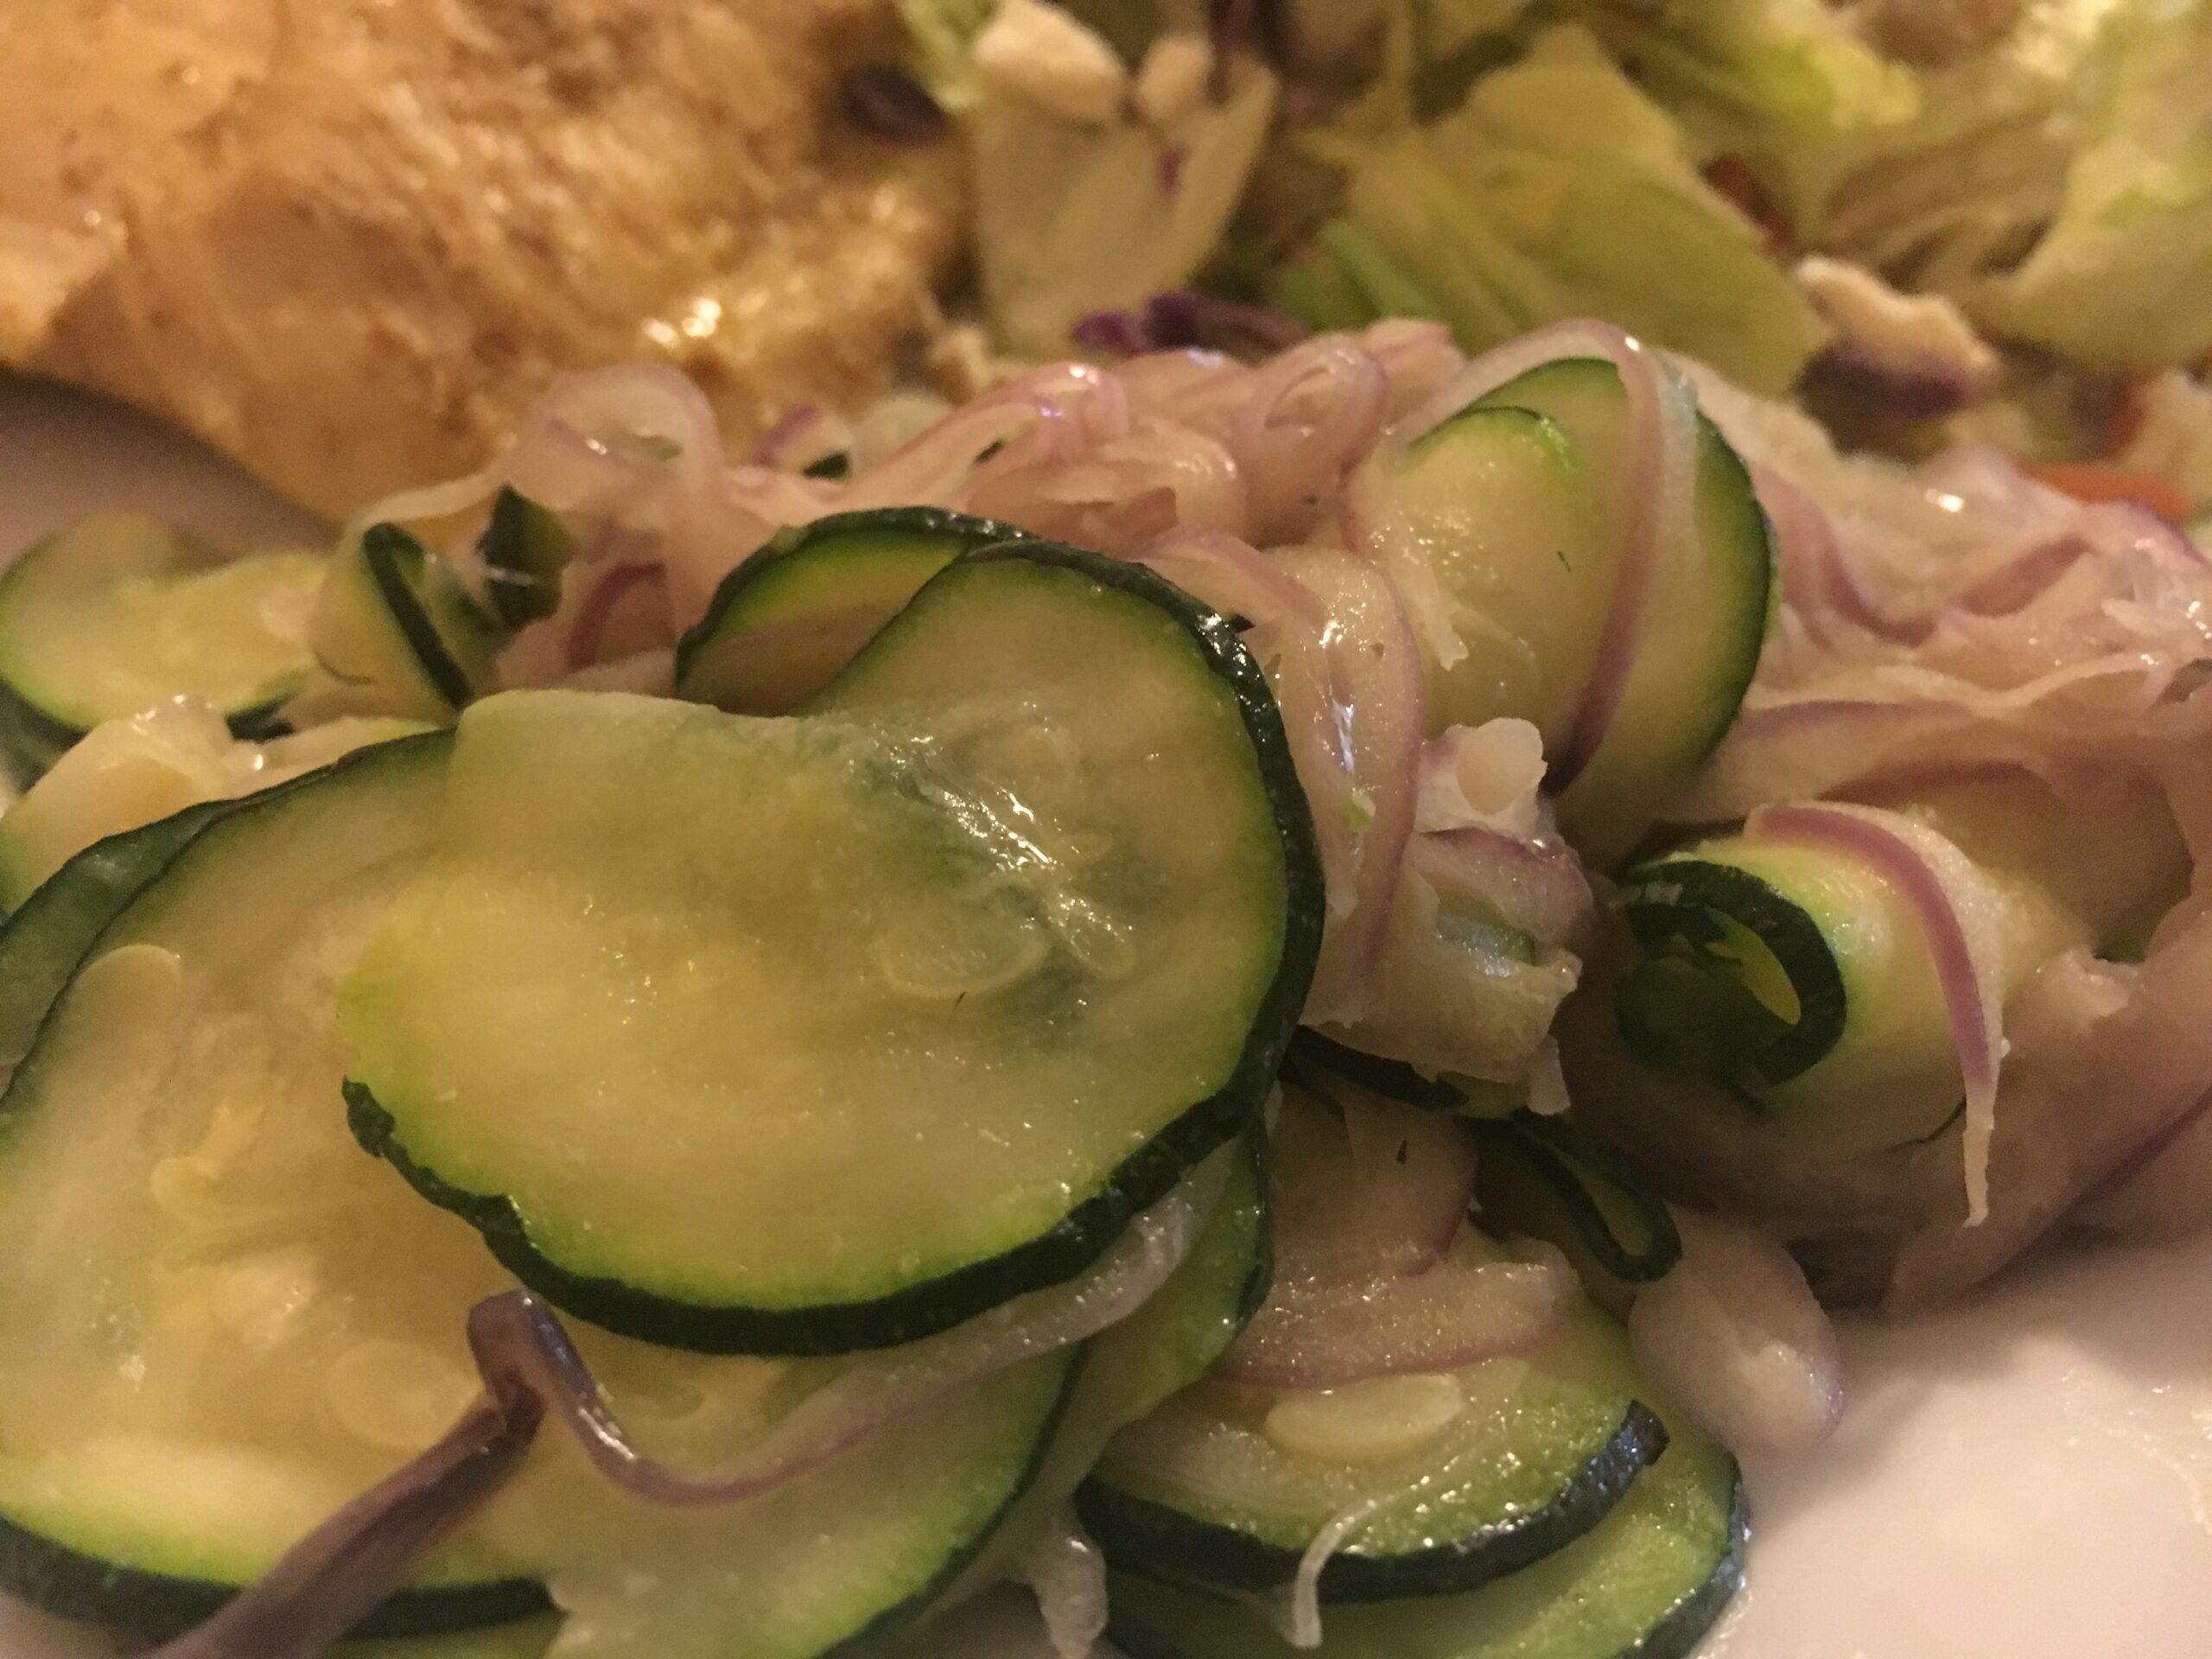 Sauteed Zucchini with red onions plated with a side salad and chicken breast